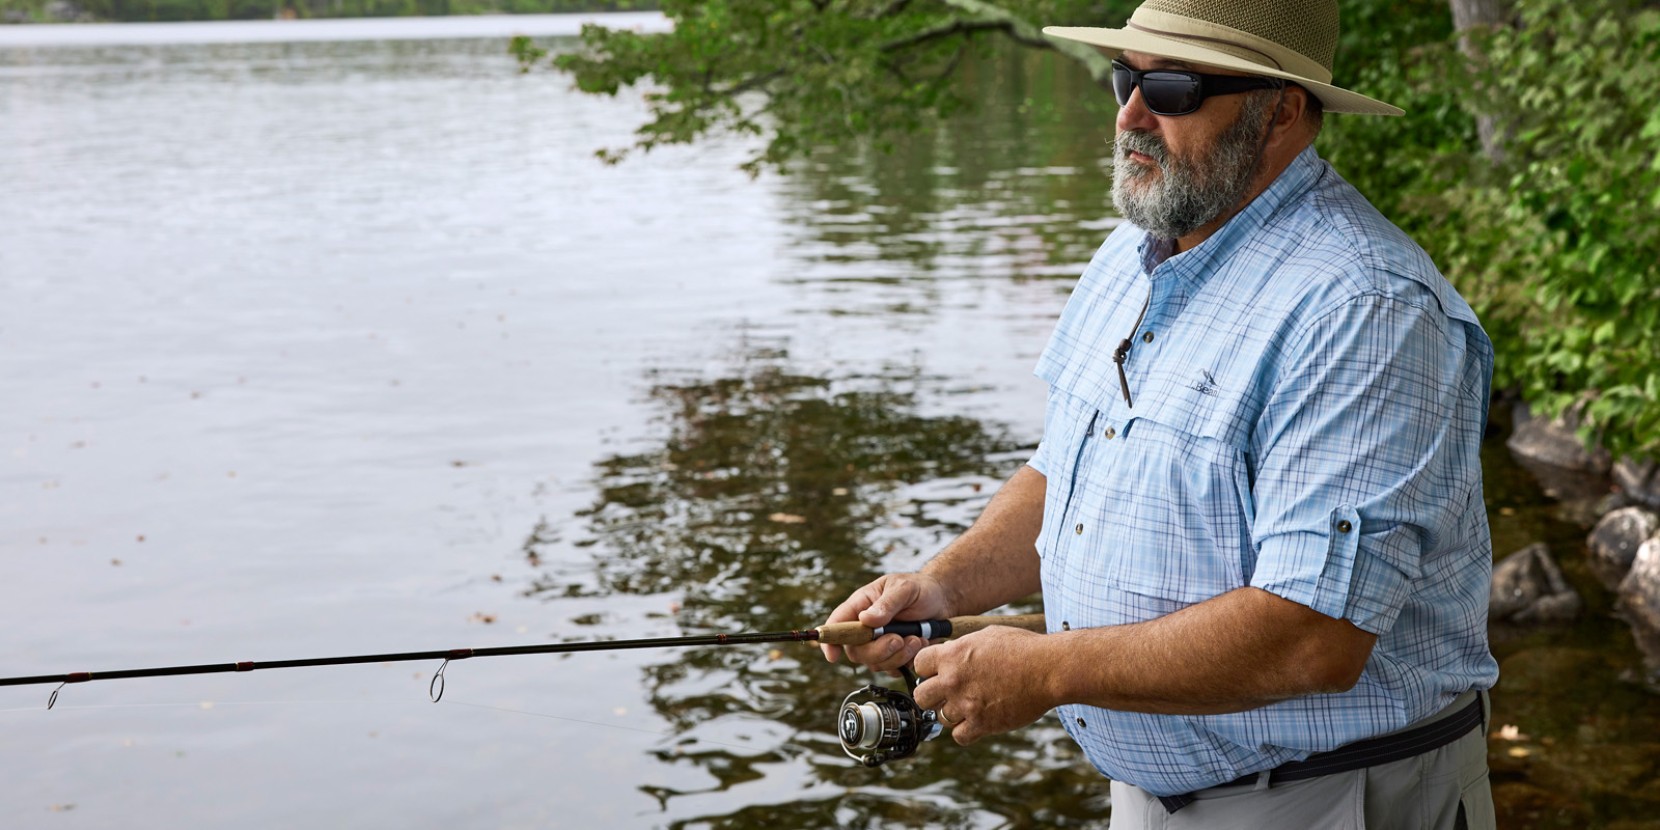 A man fishing from a river's edge wearing a wide-brimmed hat, sunglasses and a fishing shirt with sleeves rolled up.